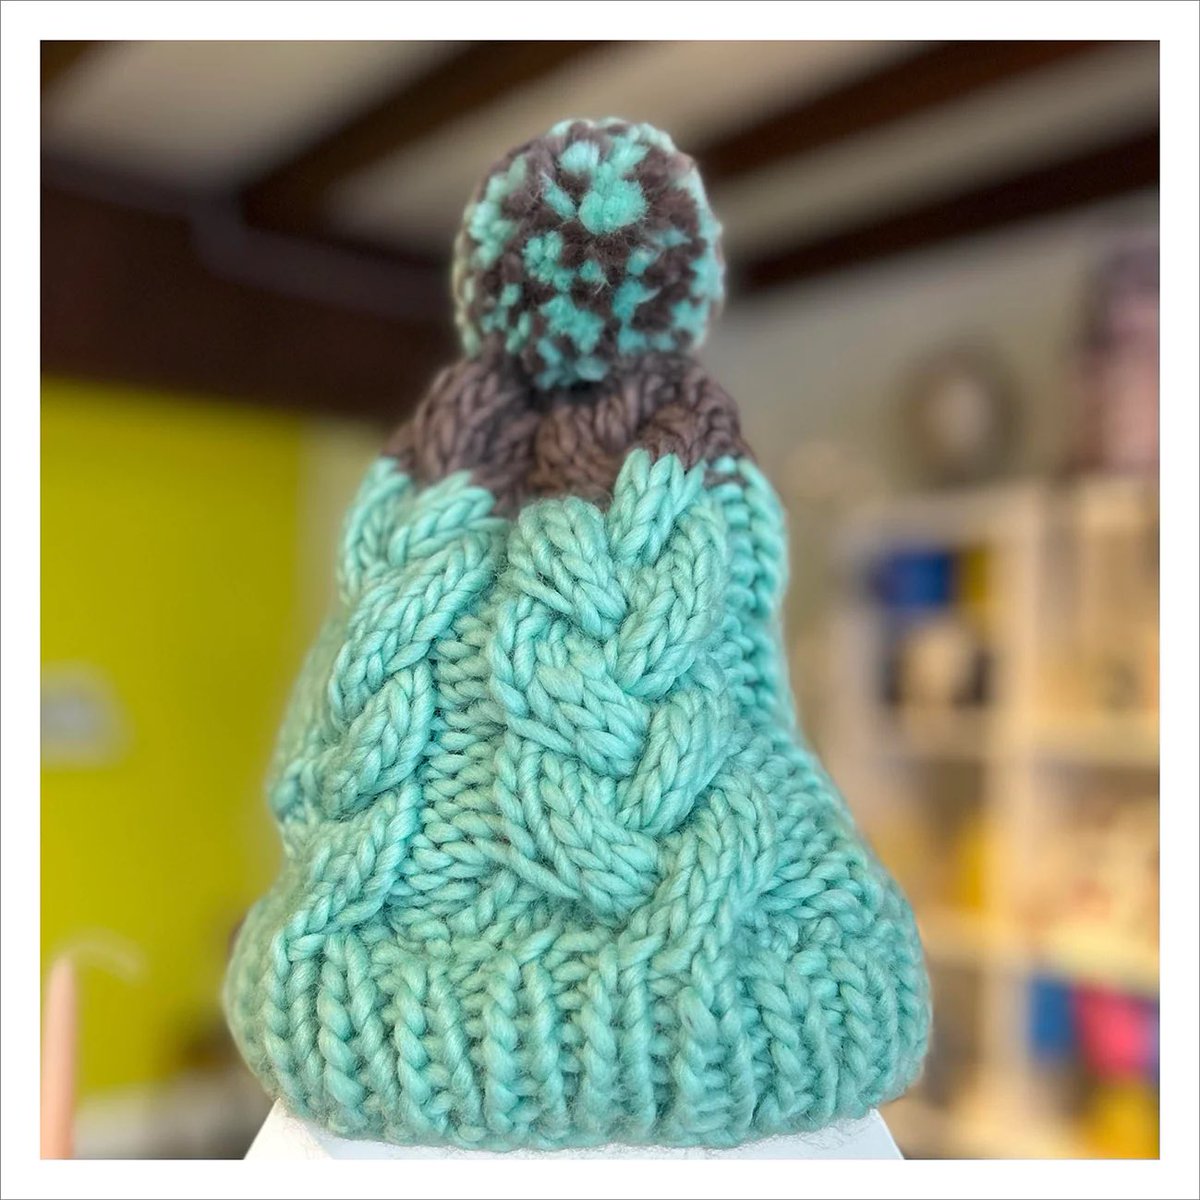 Hand knitted merino wool hats + fleecy lining are back in stock ! Made in Aberfoyle for Intrepid #pompomhats #bobblehat #merino #handmade #madeinaberfoyle #christmasgift #intrepidessentials